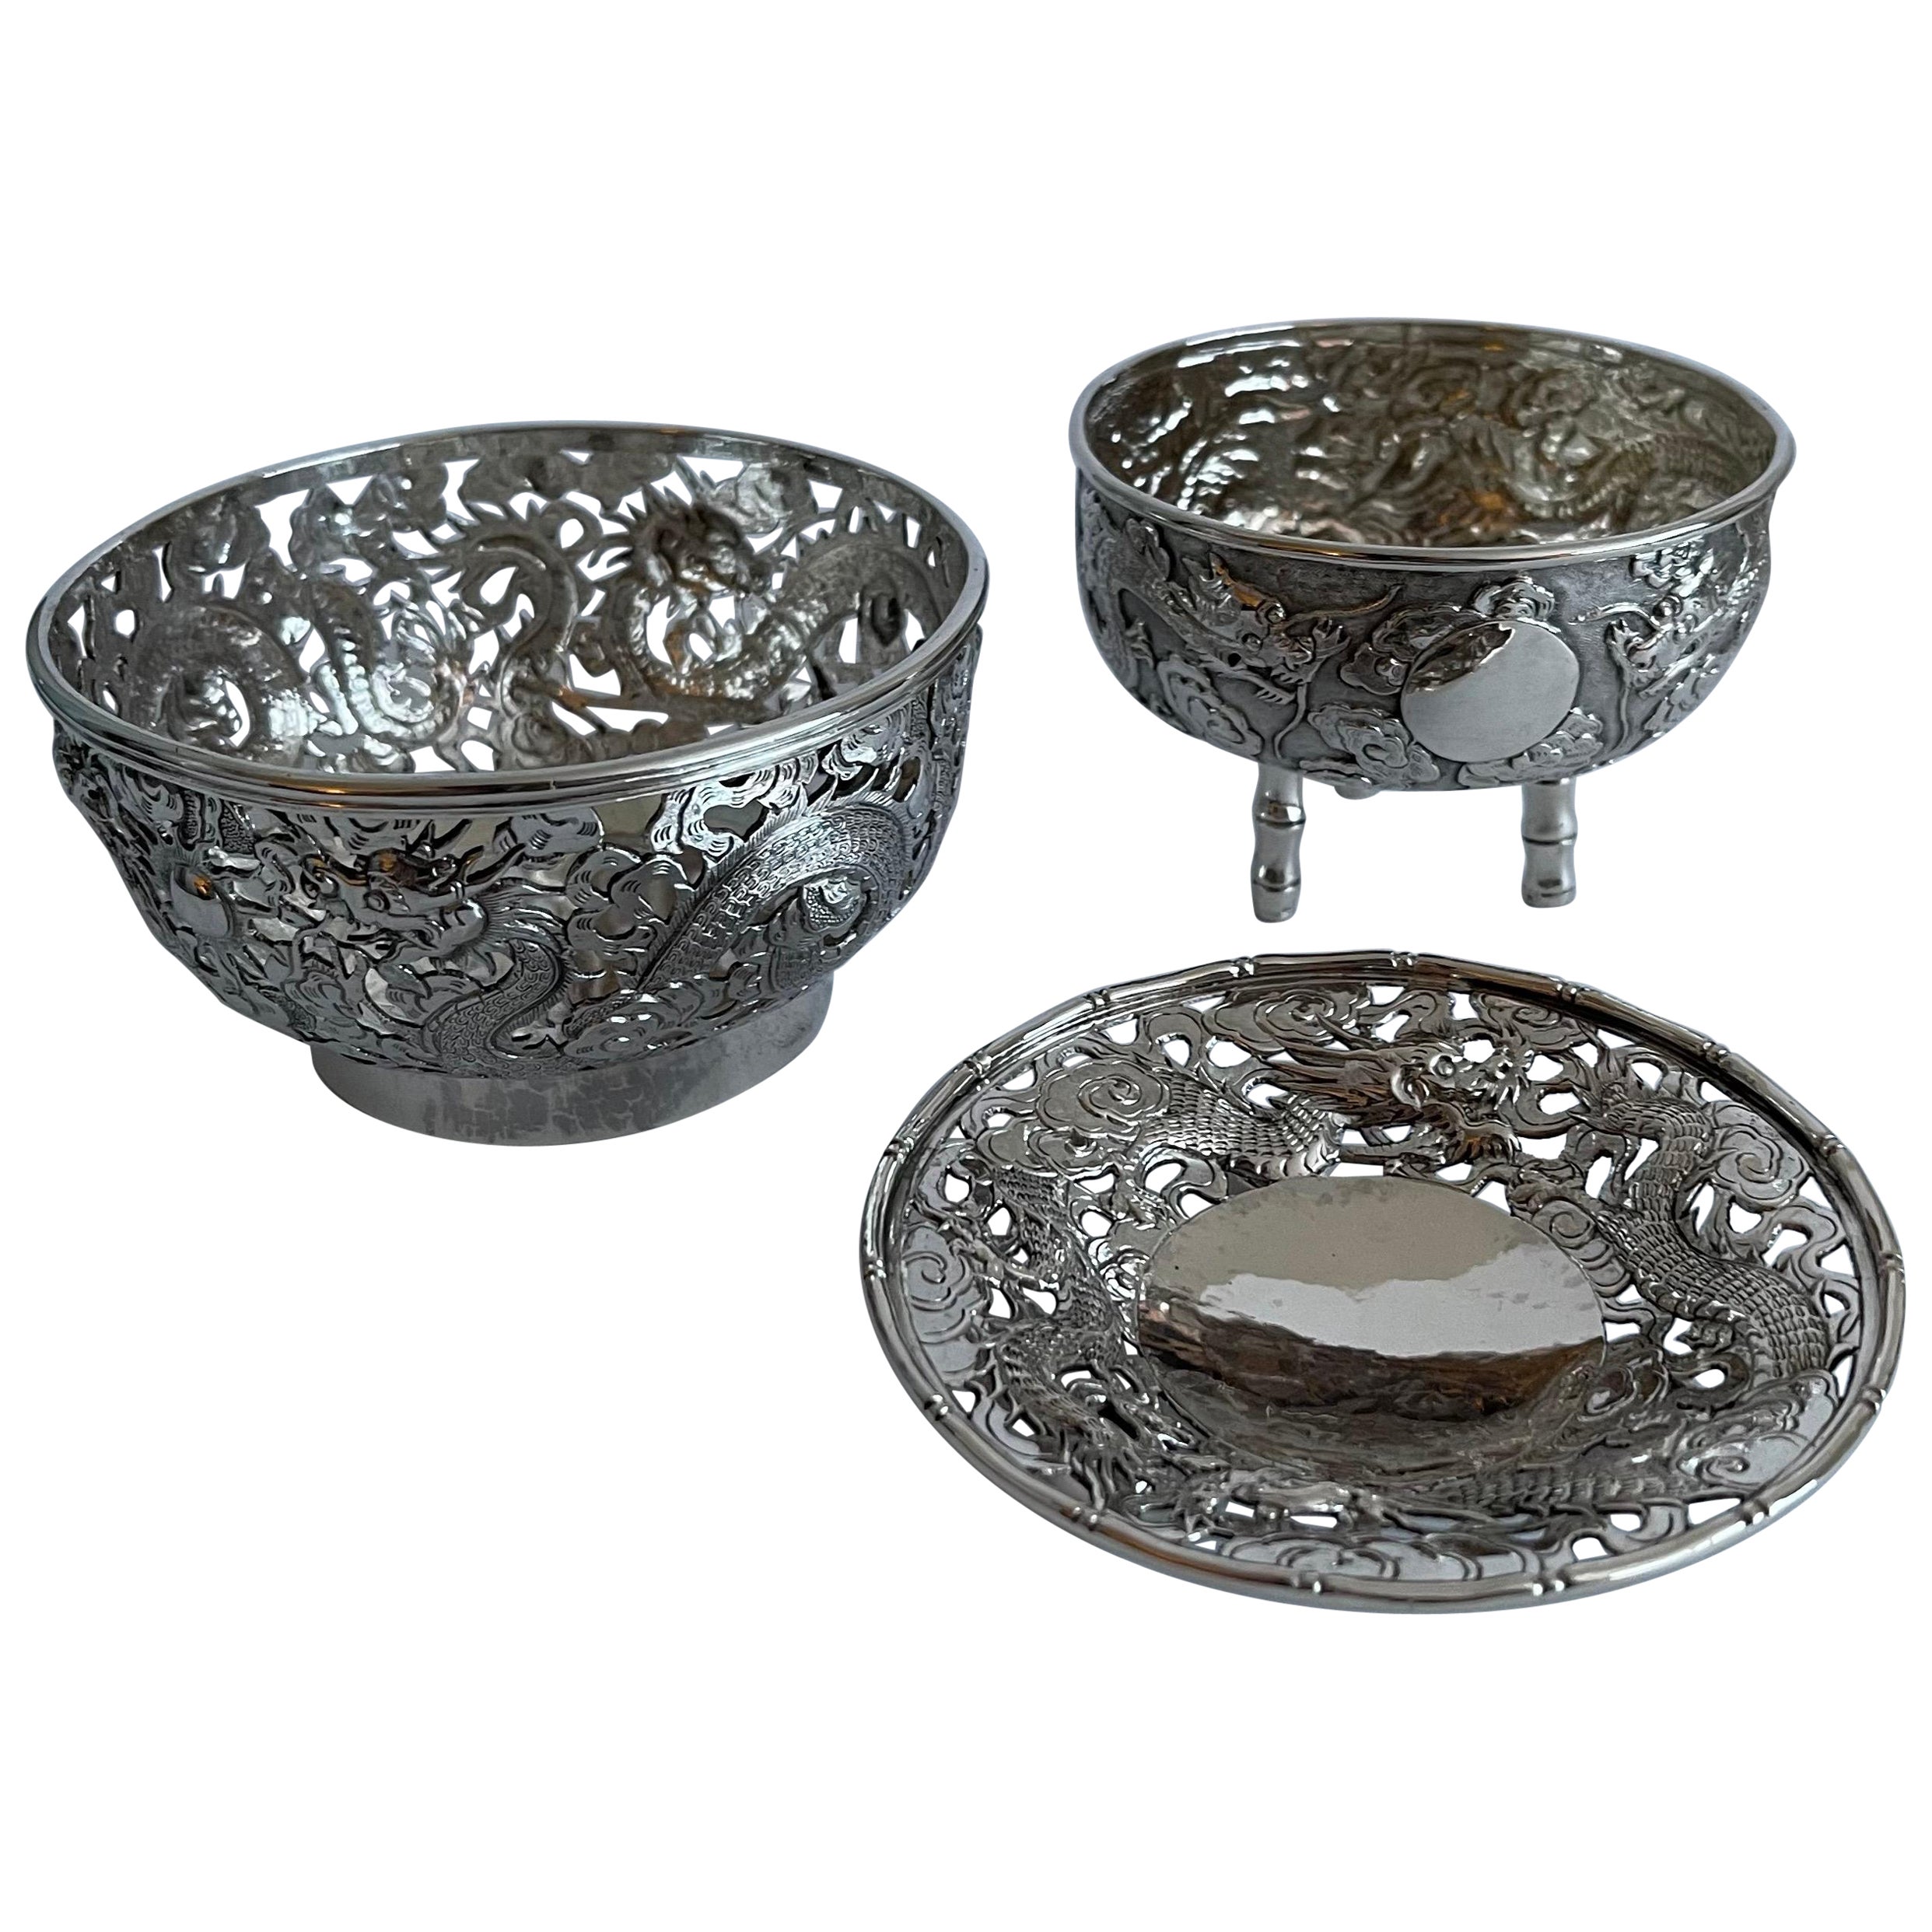 Chinese Export Silver Dragon Bowls, Set of 3